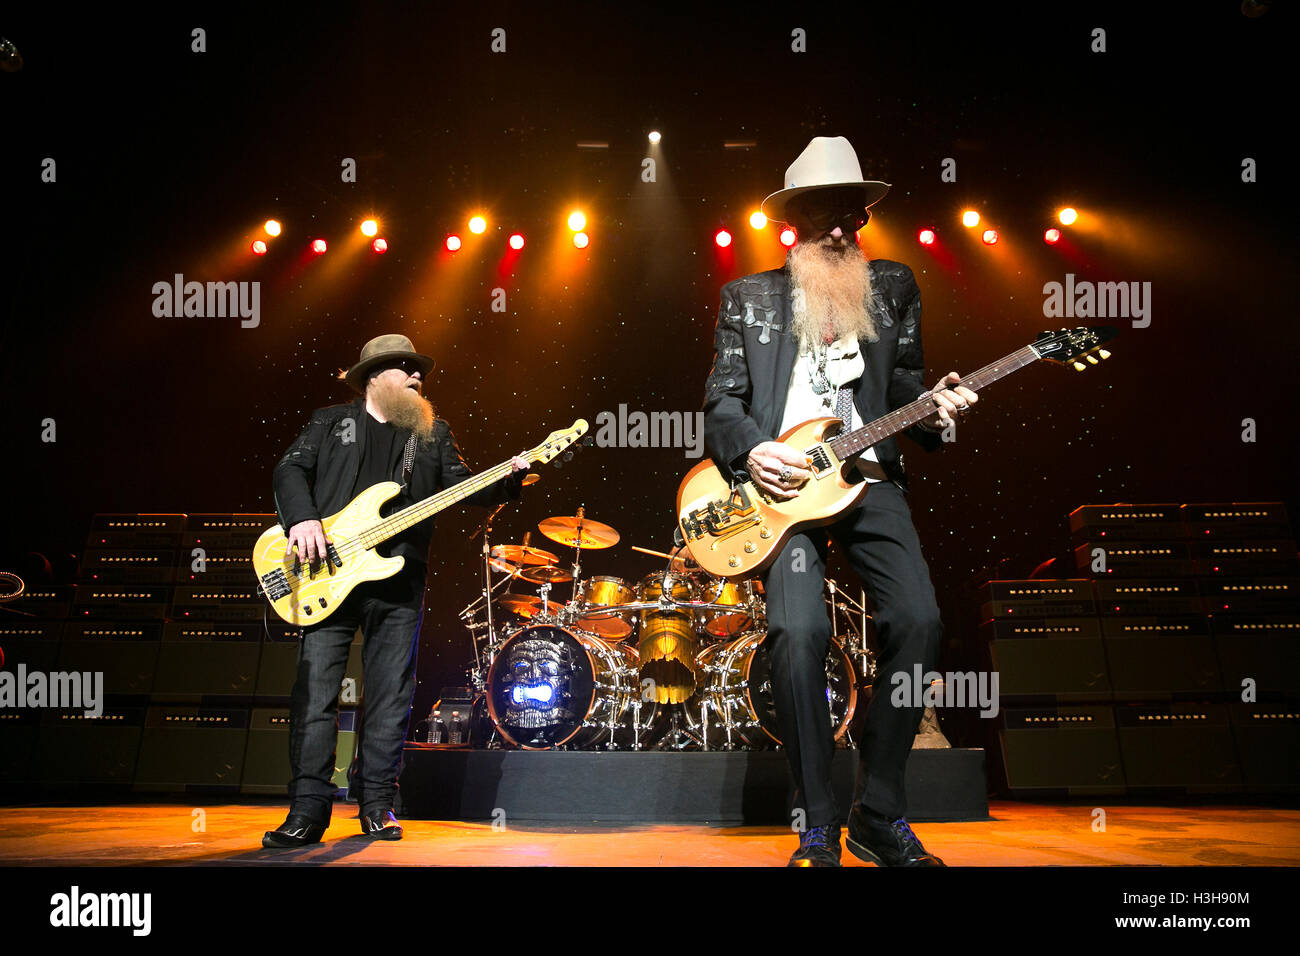 (L-R) Musicians Dusty Hill and Billy Gibbons of ZZ Top perfom at the Warfield Theater on October 2, 2016 in San Francisco, California. Stock Photo